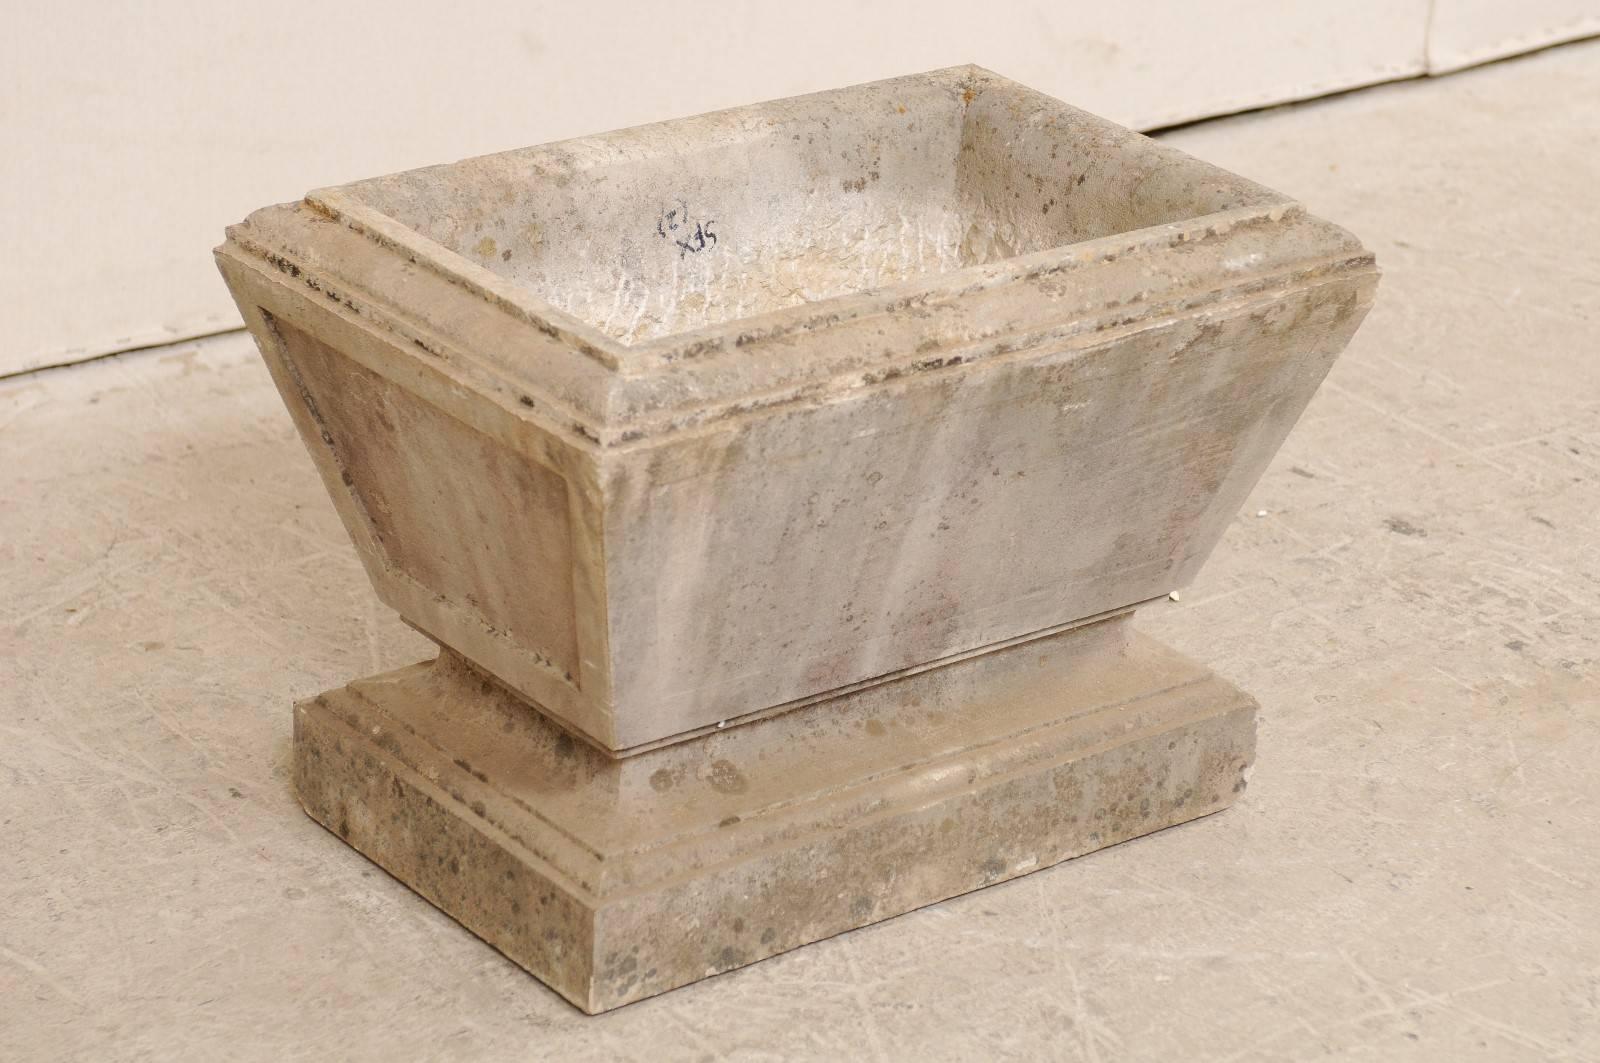 A European stone planter from the early 20th century. This antique, hand-carved stone planter has an overall rectangular-shape, with recessed panel designed sides, which tapers slightly towards the bottom. Just below the main body, the stone is